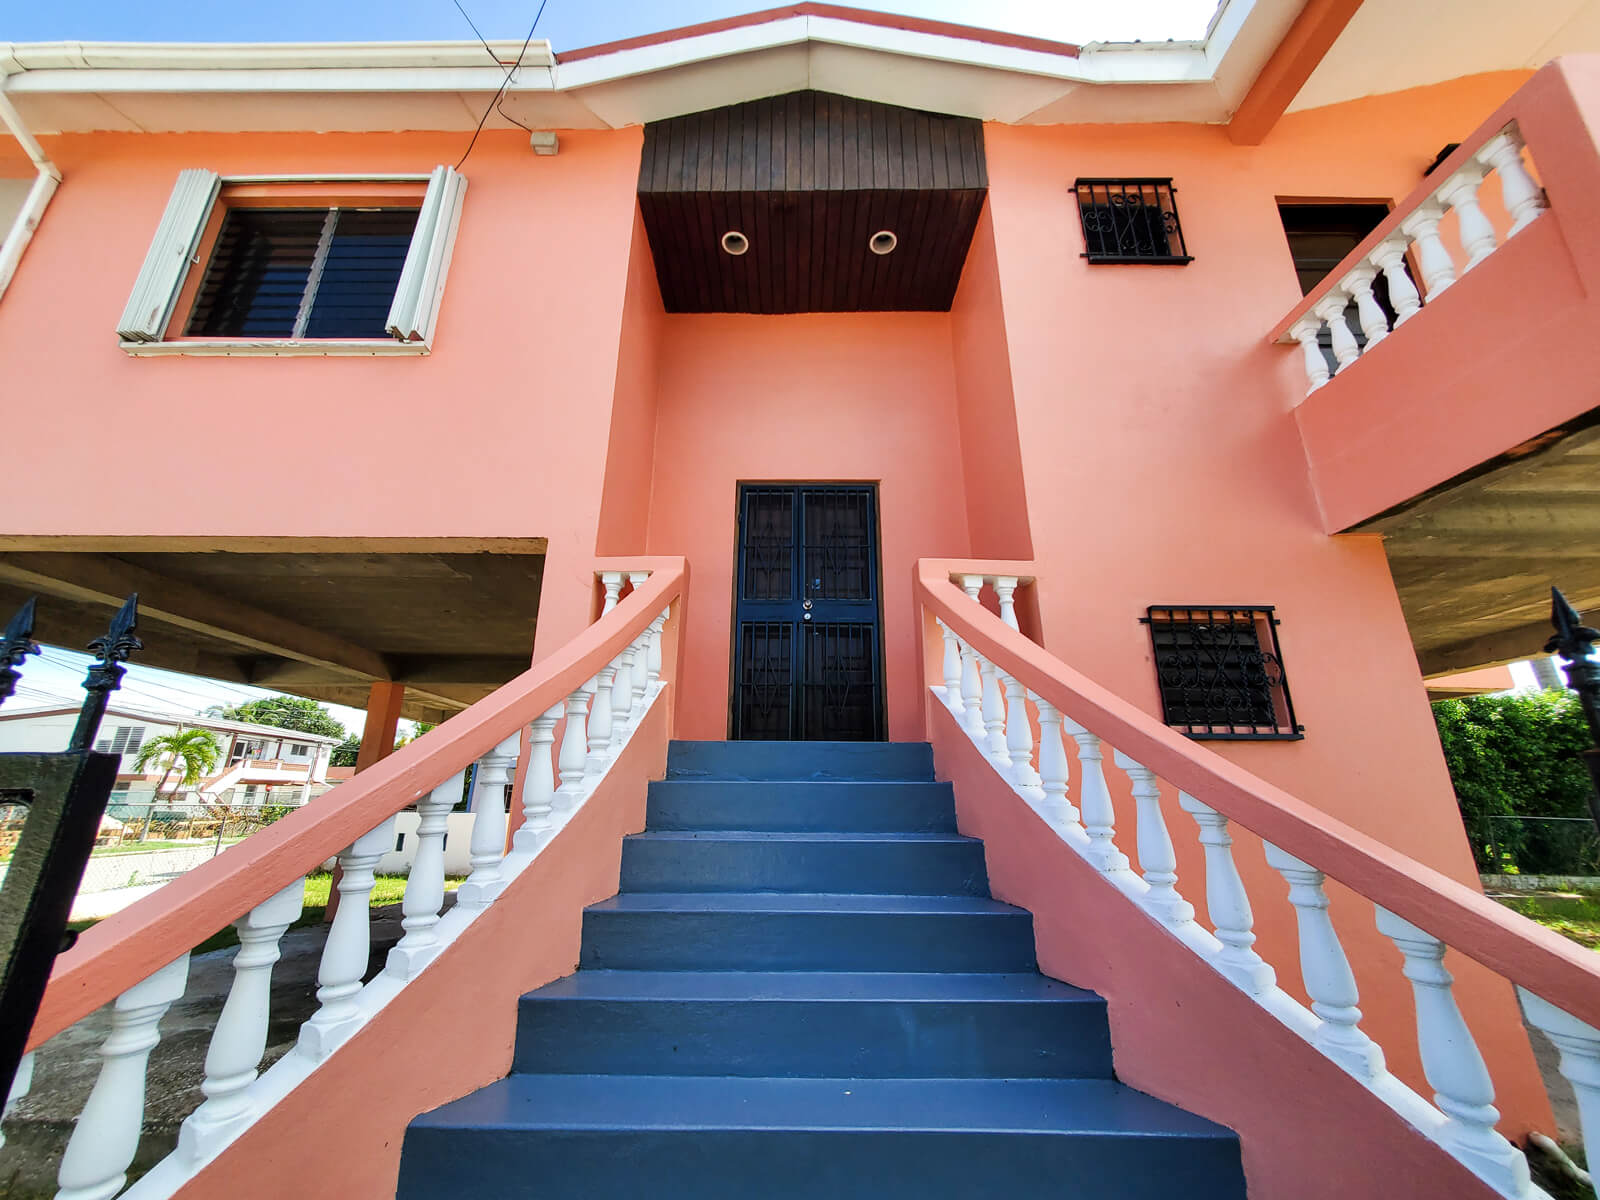 Unfurnished Three Bedroom Elevated House for Rent in Belize City